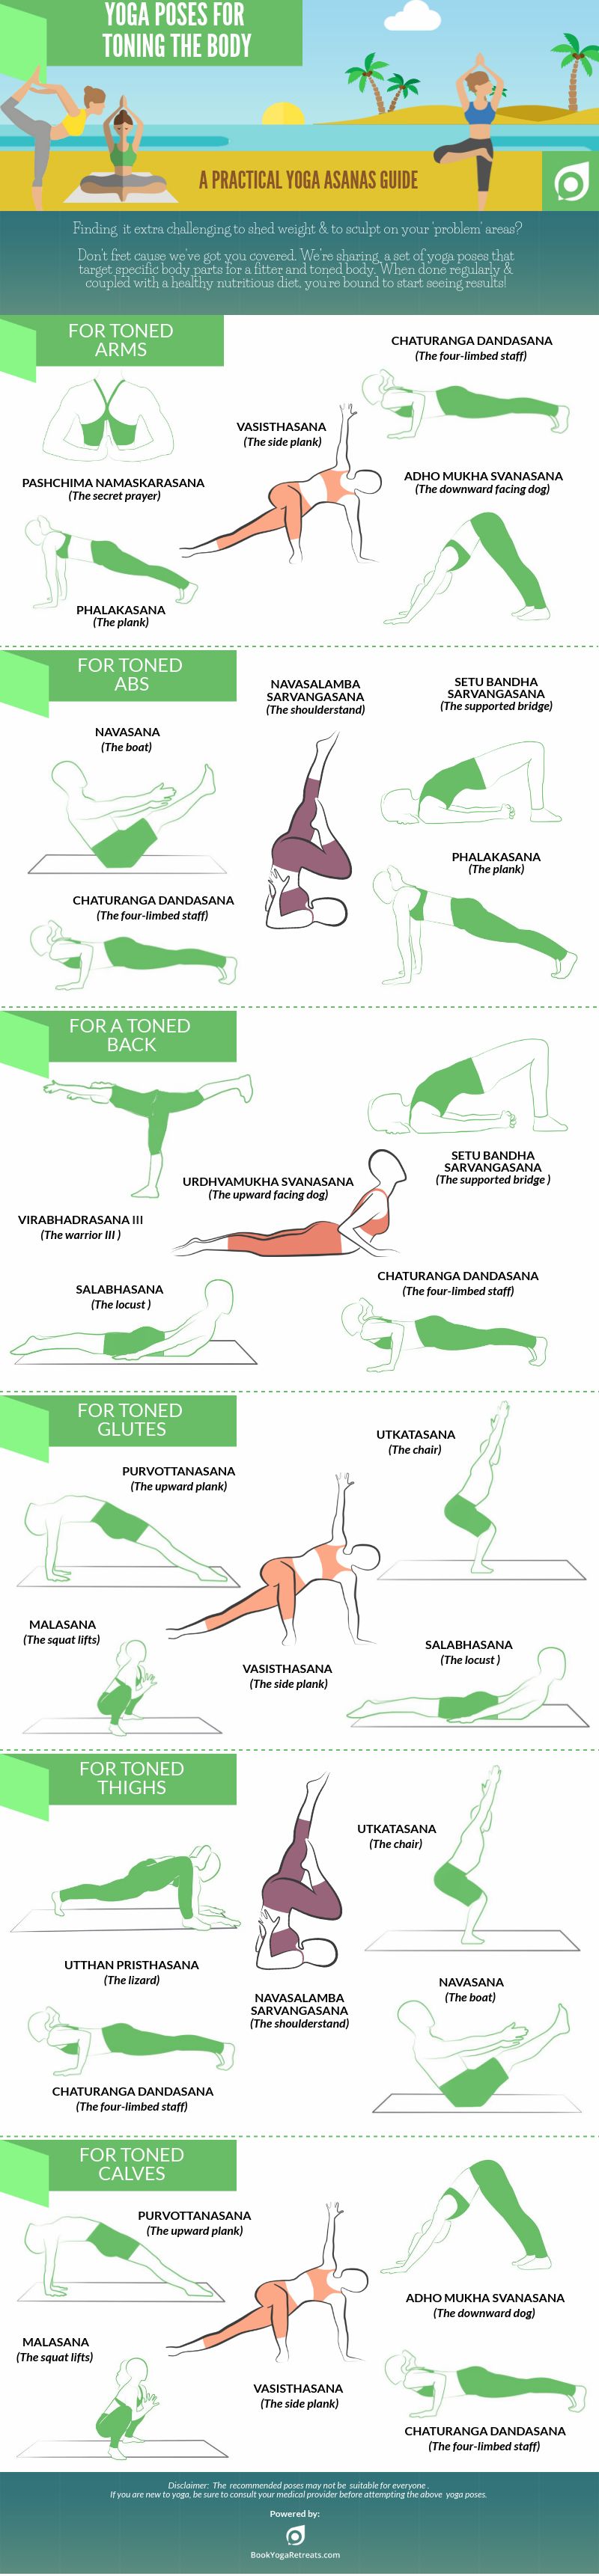 Yoga Postures that Do Wonders for Toning and Slimming Specific Body Parts - Infographic